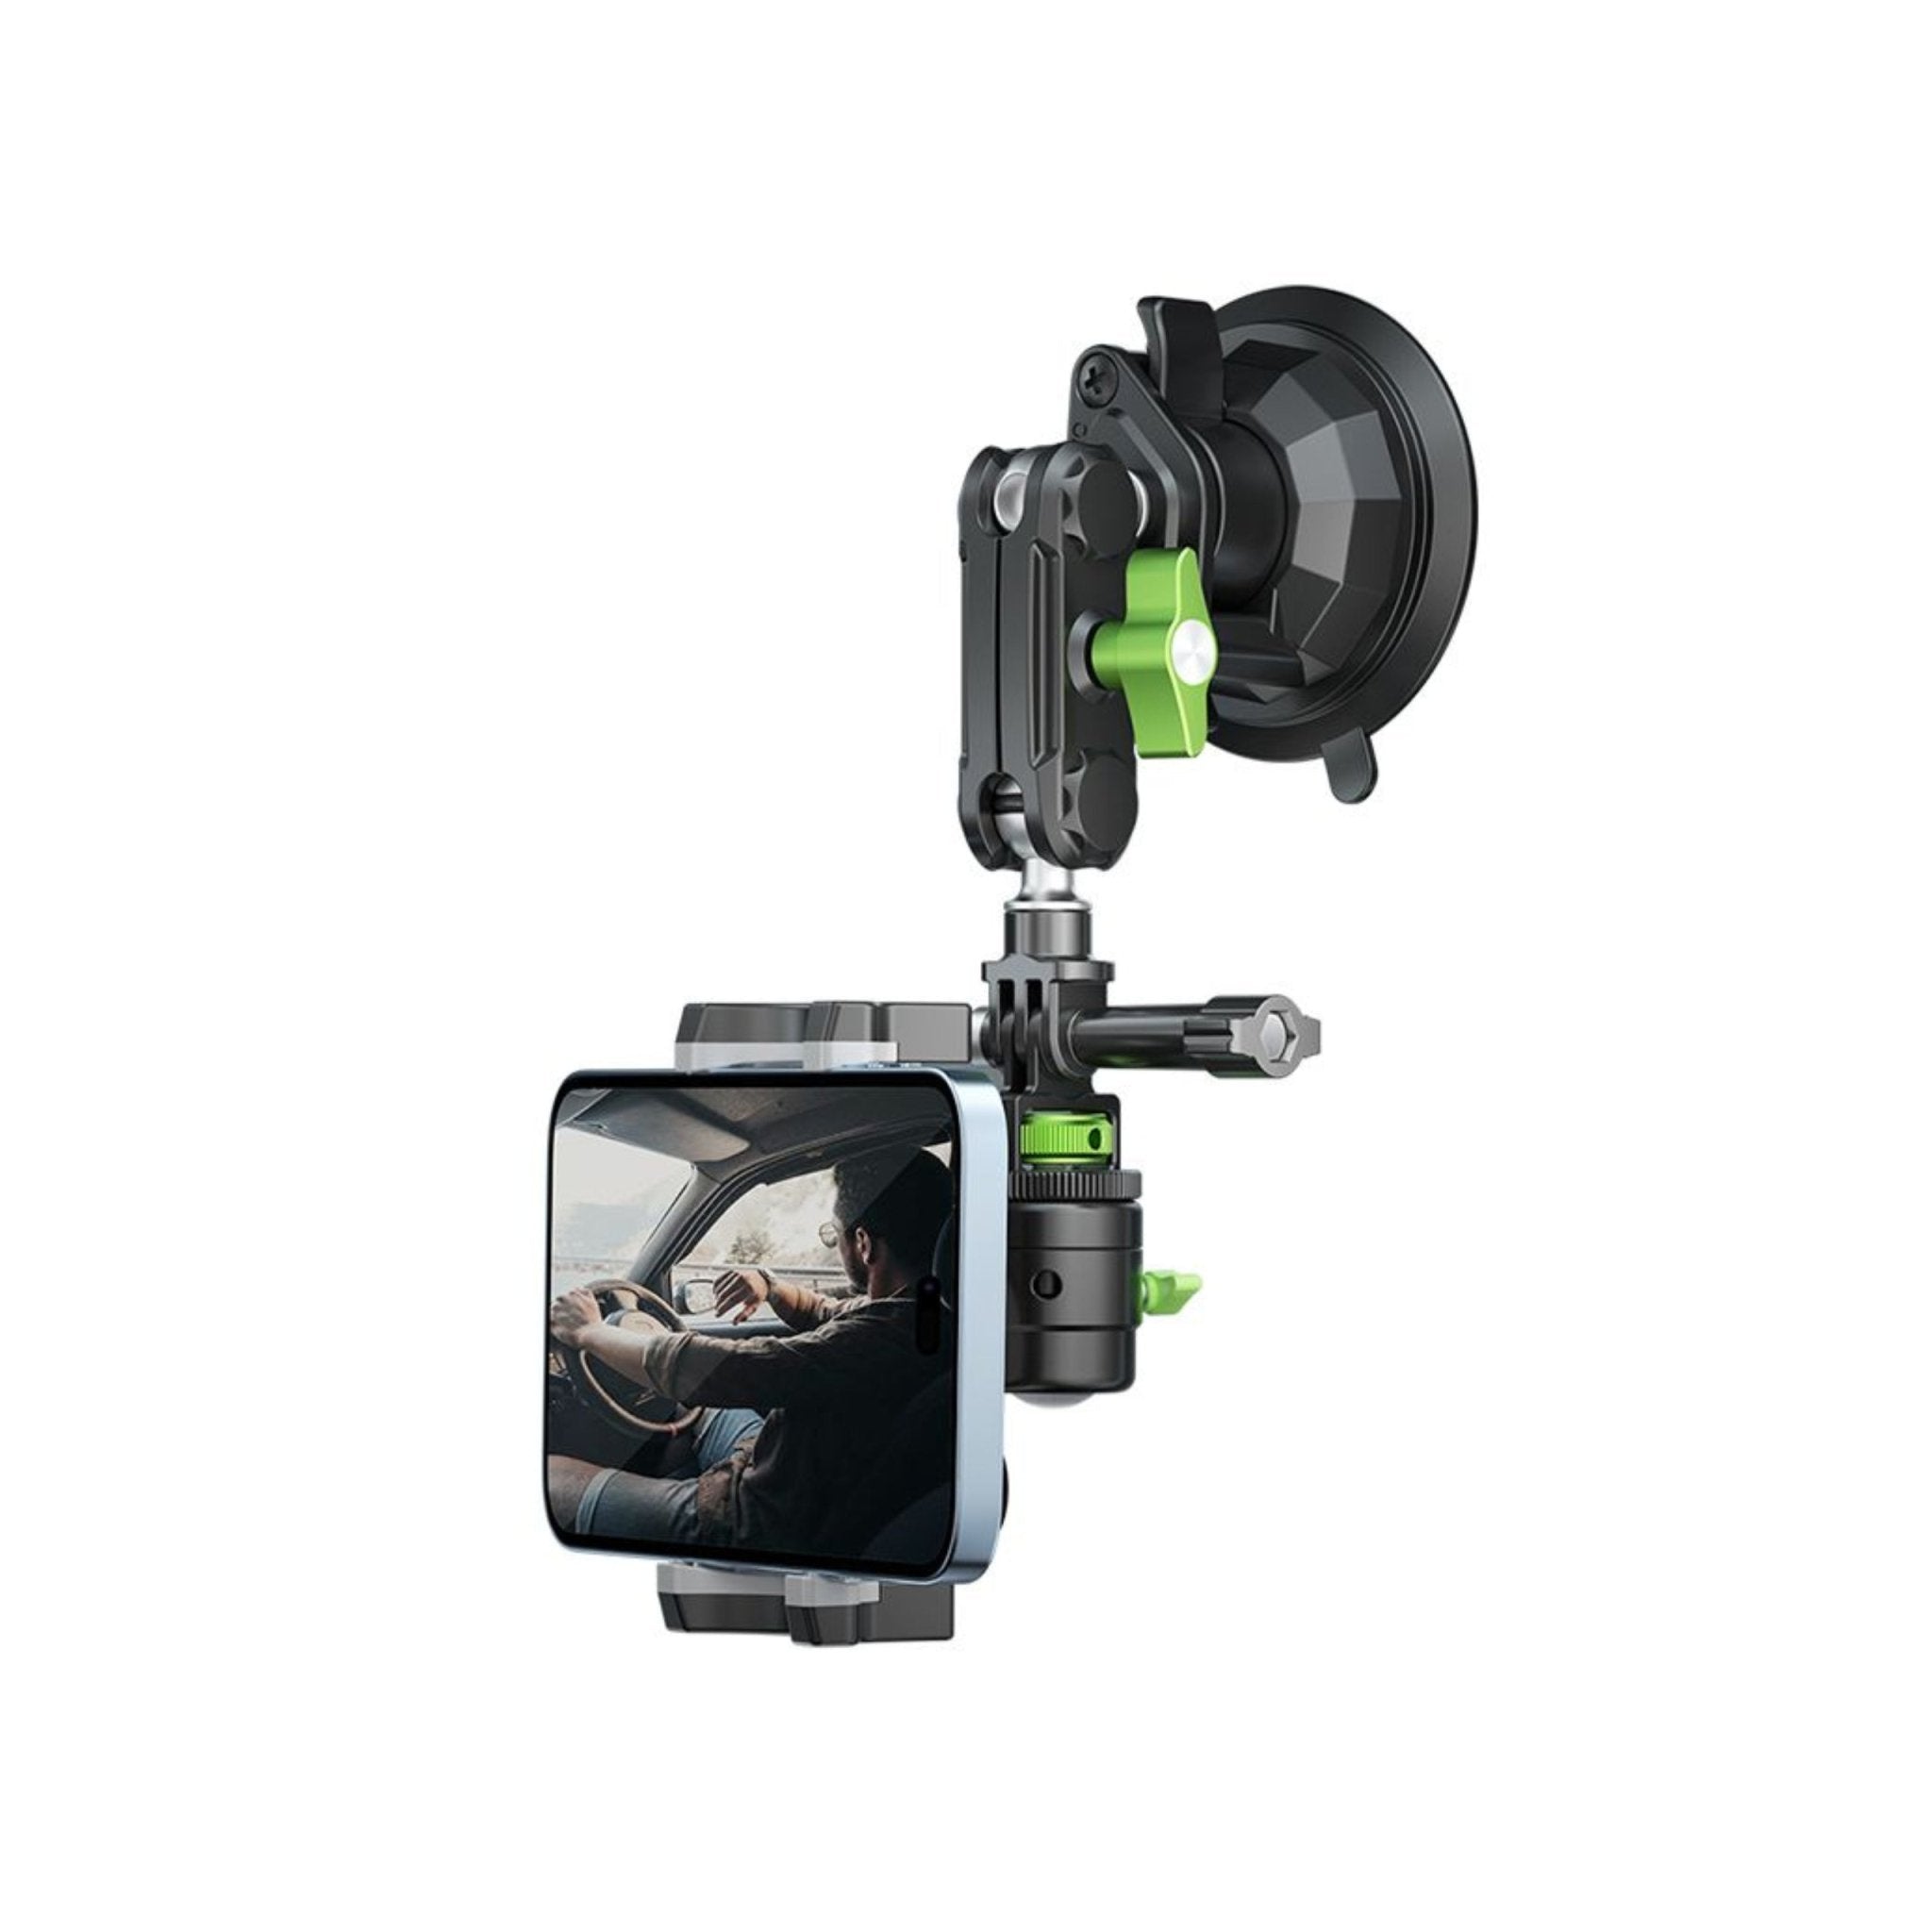 Green Lion Ultimate Holder Pro With Suction Cup Mount - Black